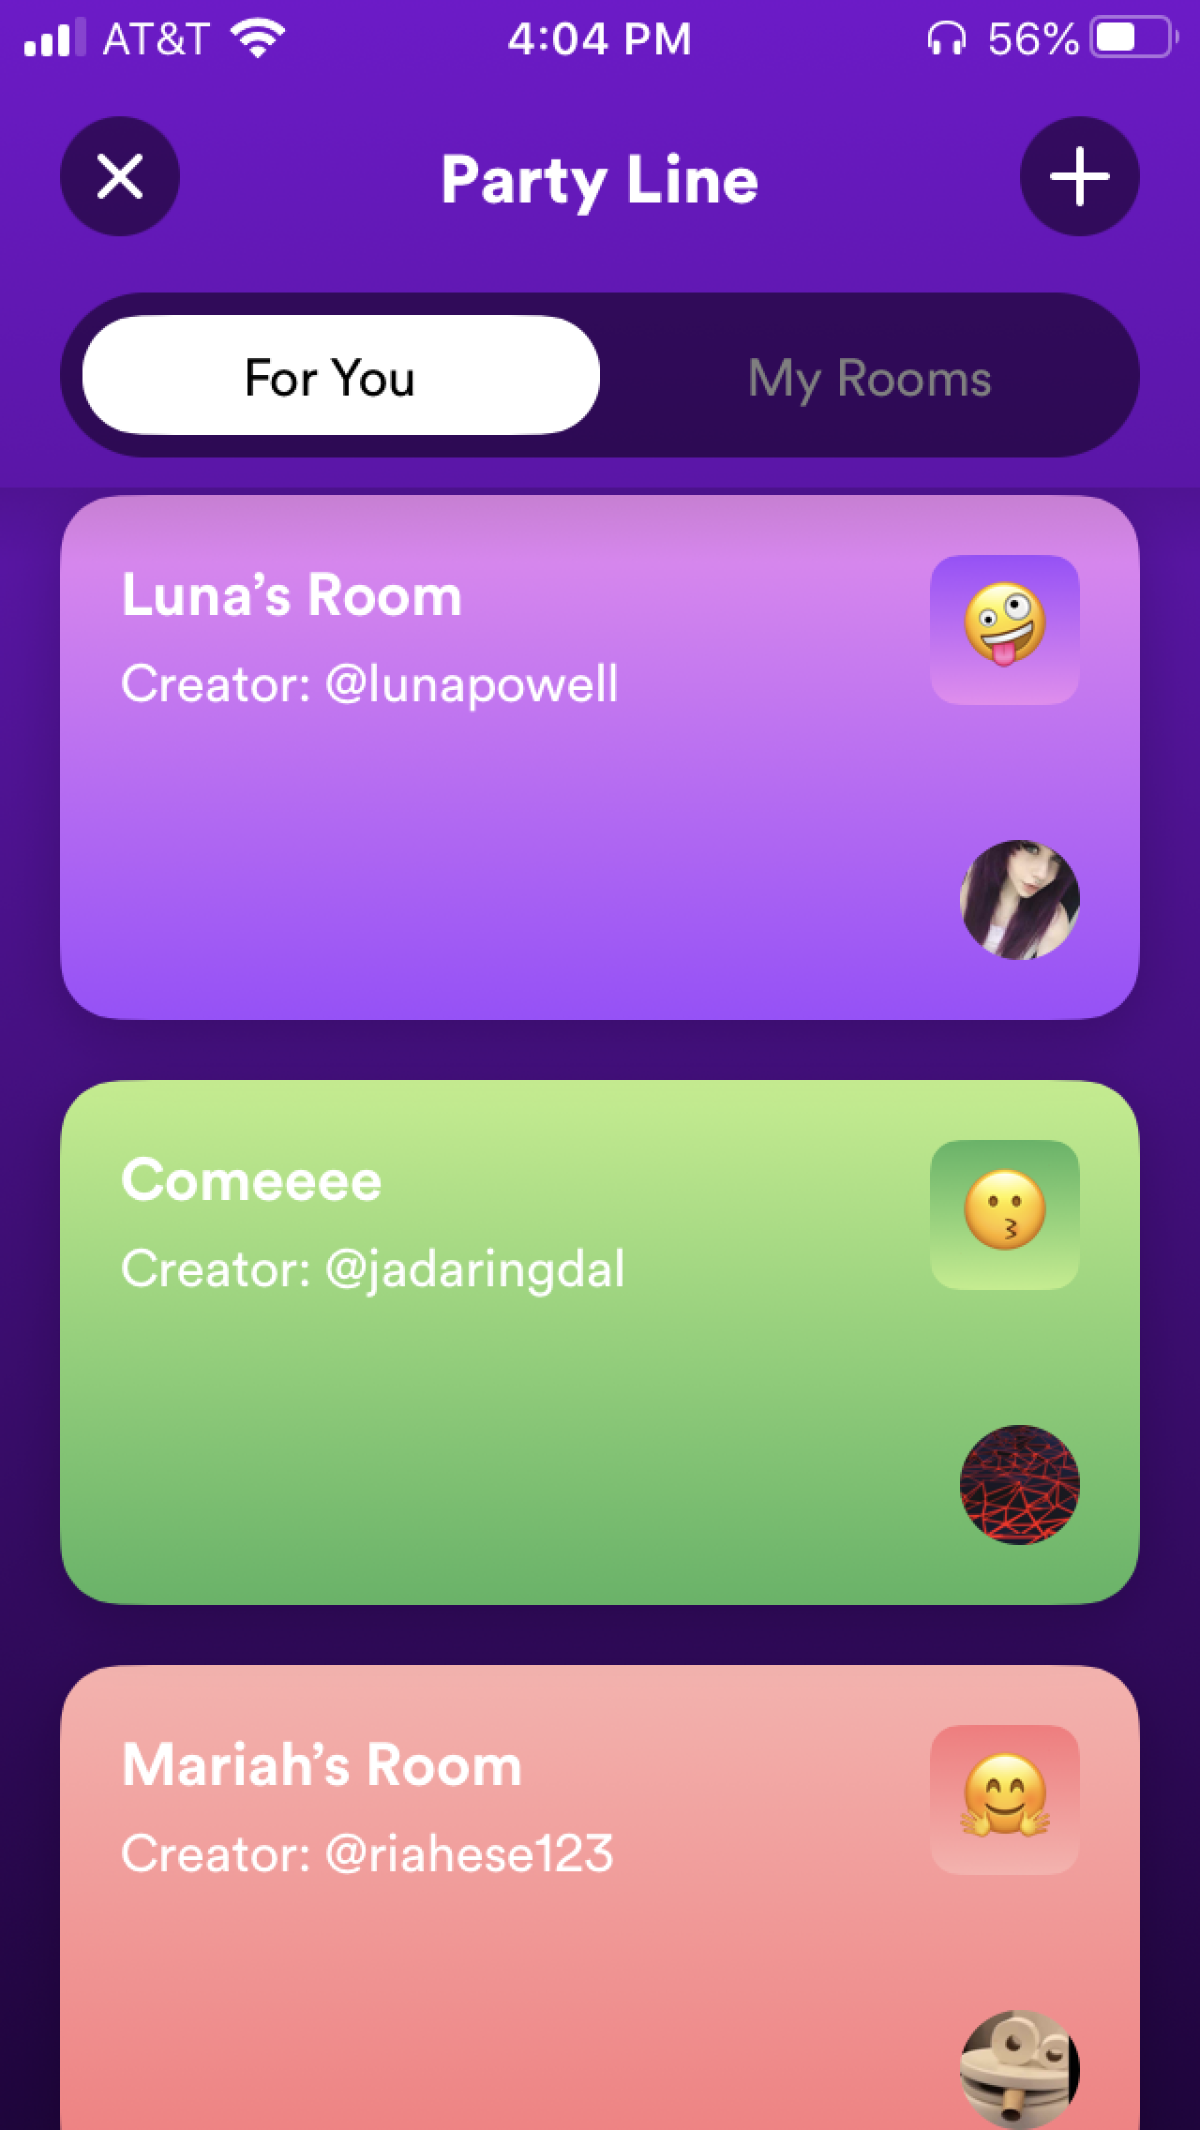 Here's what the Party Line landing page looks like, with neon colored boxes representing individual rooms. For privacy reasons, I won't be sharing screenshots of the inside of each room.